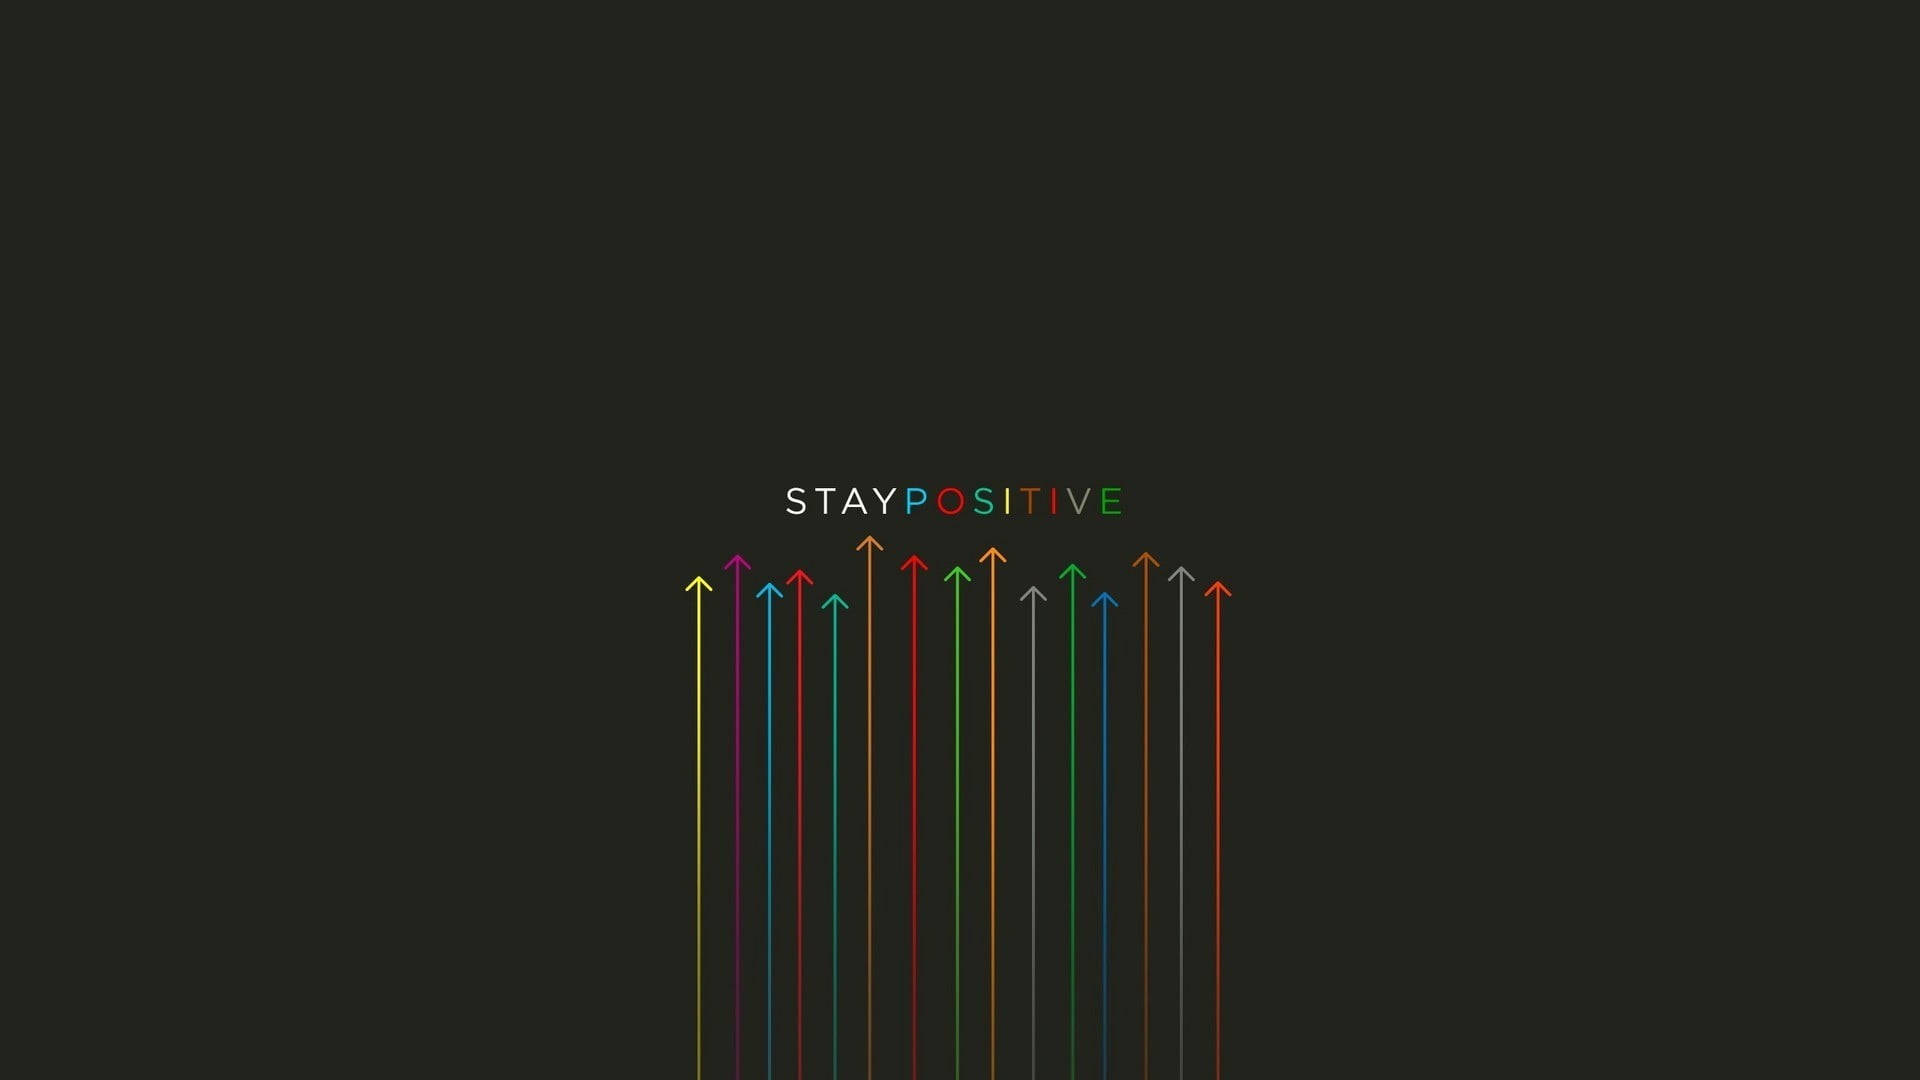 Multicolored Stay Positive Backgrounds Background